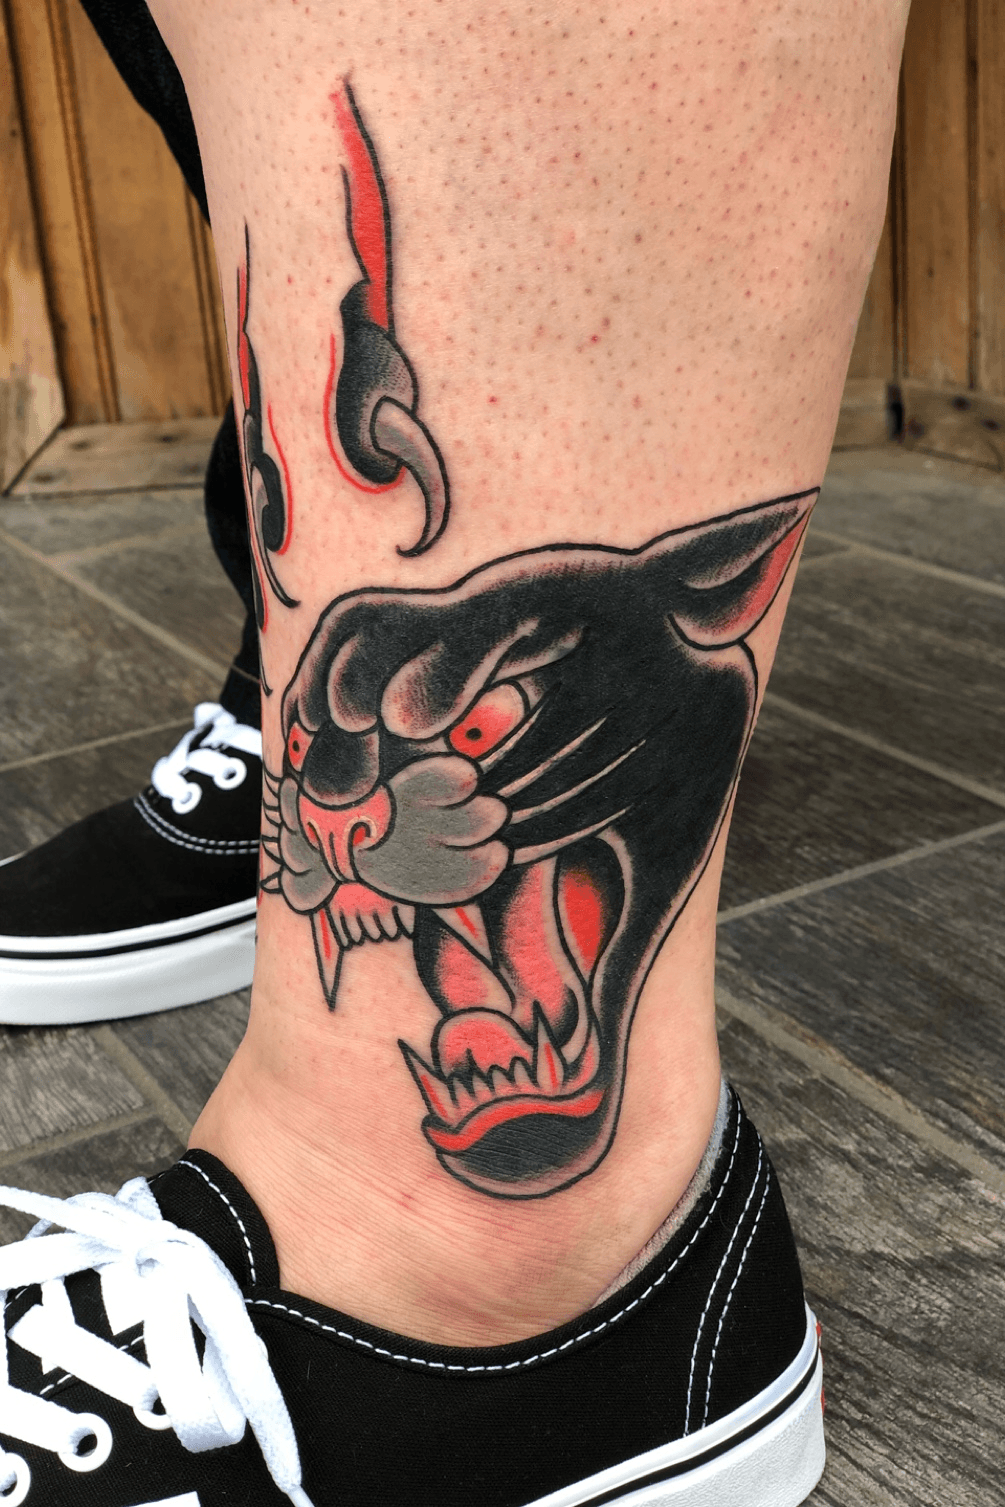 Tattoo uploaded by Cassie Lynn O'Neal • Panther cover up #panthertattoo # panther #AmericanTraditional #traditionaltattoo #coveruptattoo #coverup • Tattoodo